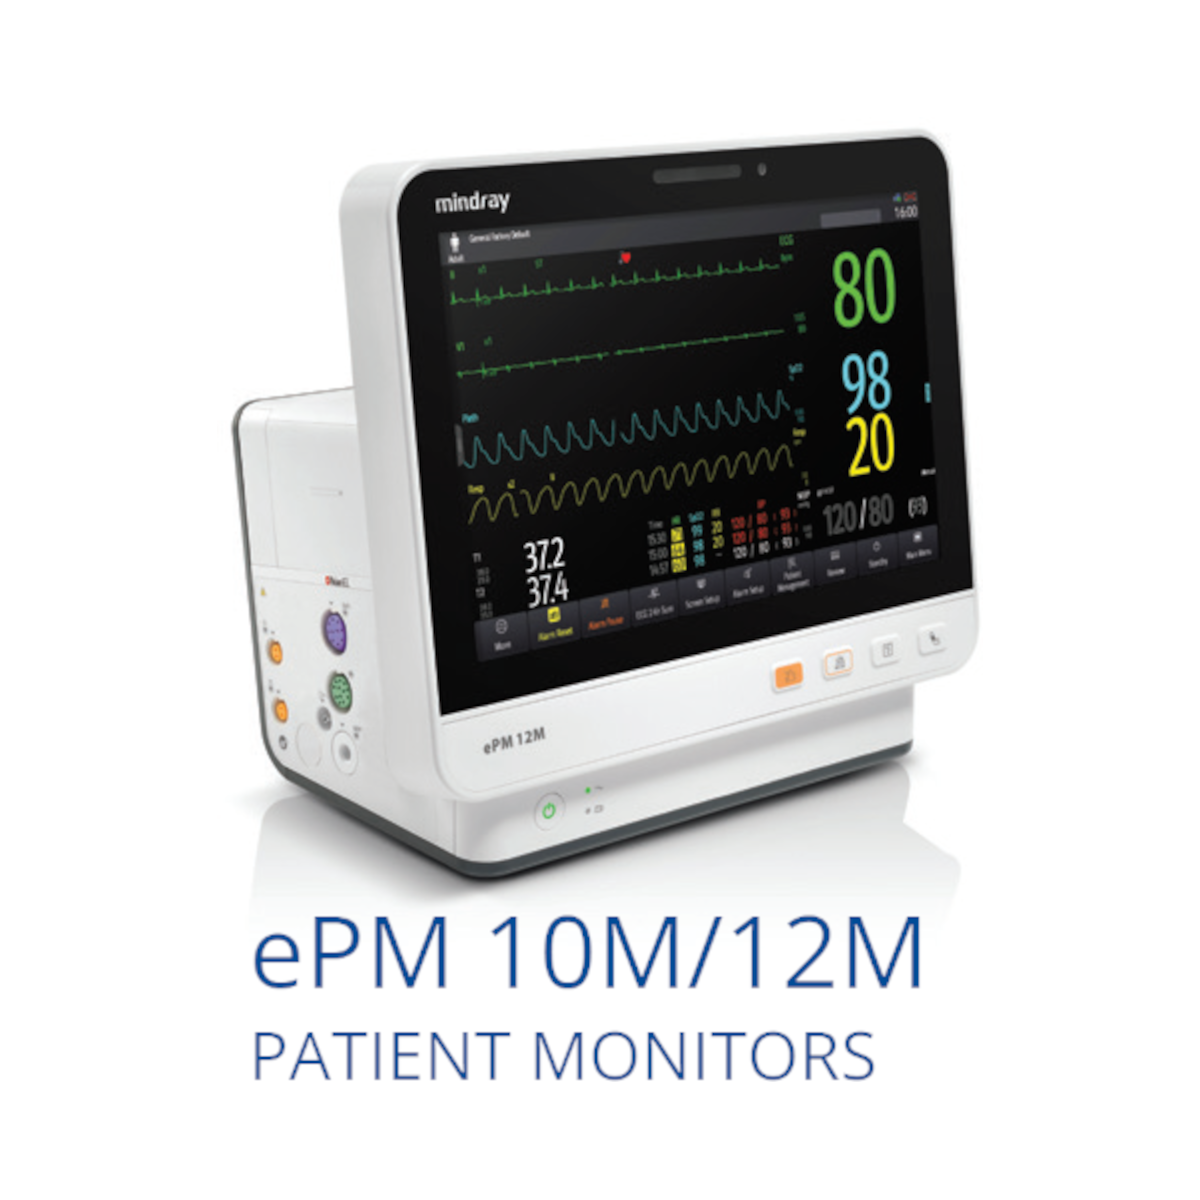 Mindray Medical Equipment: ePM 10M/12M Patient Monitor